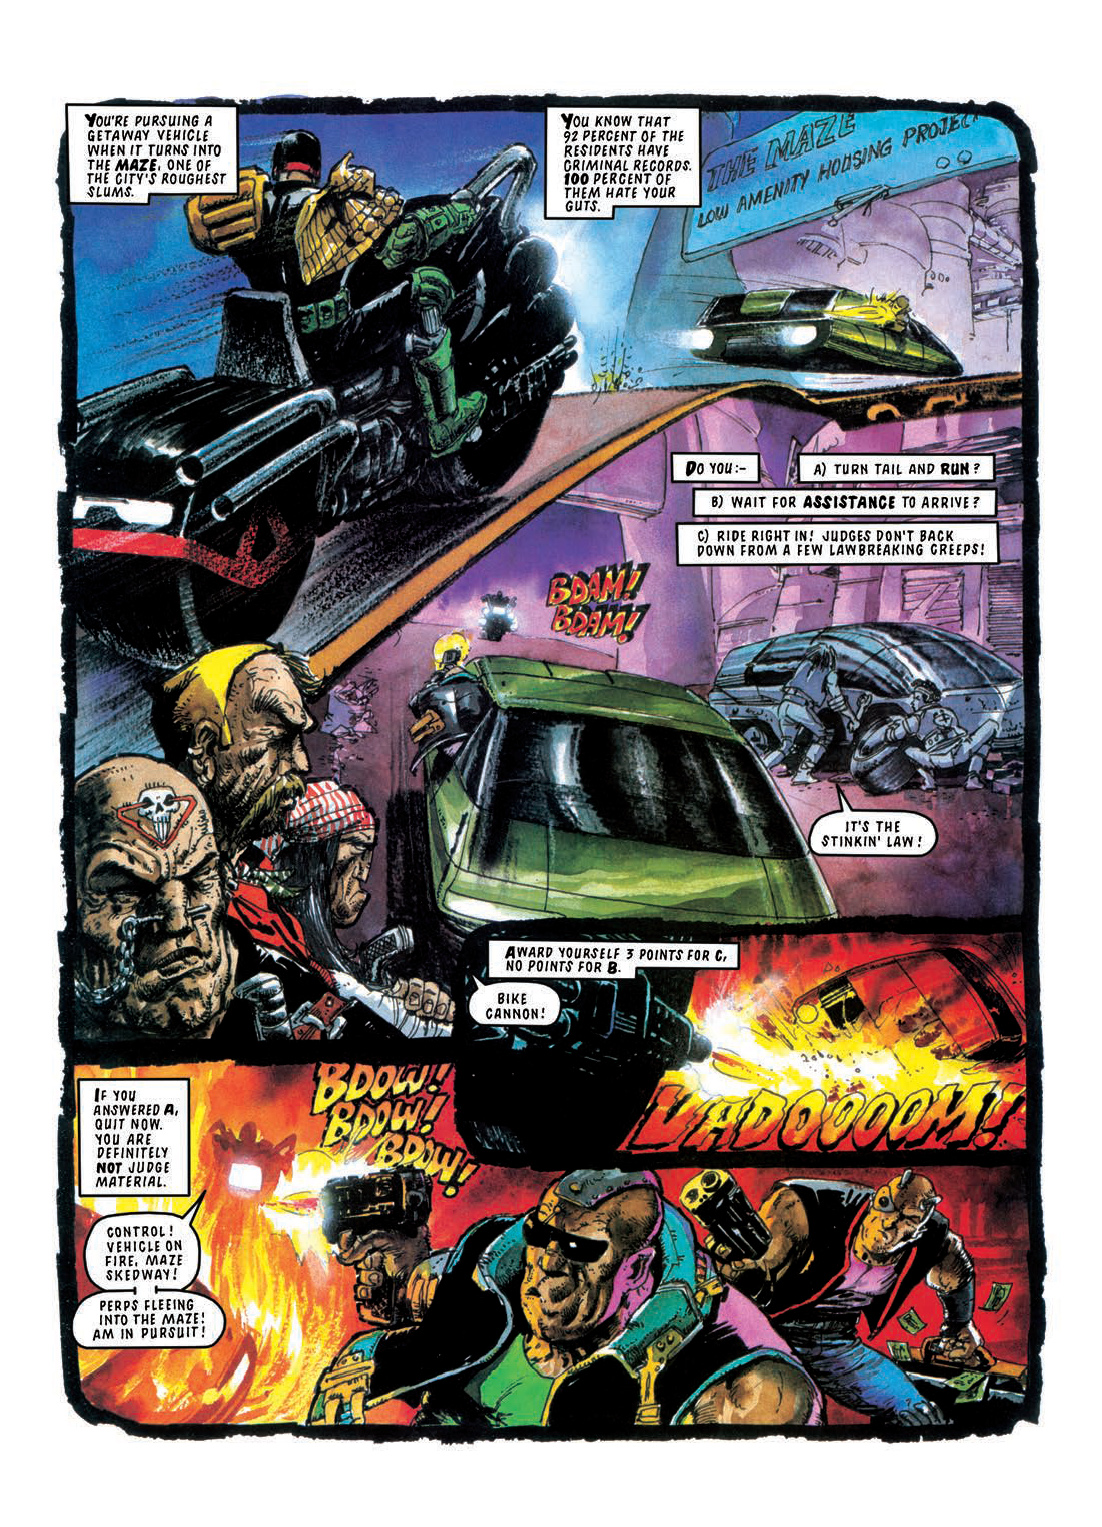 Read online Judge Dredd: The Restricted Files comic -  Issue # TPB 4 - 7